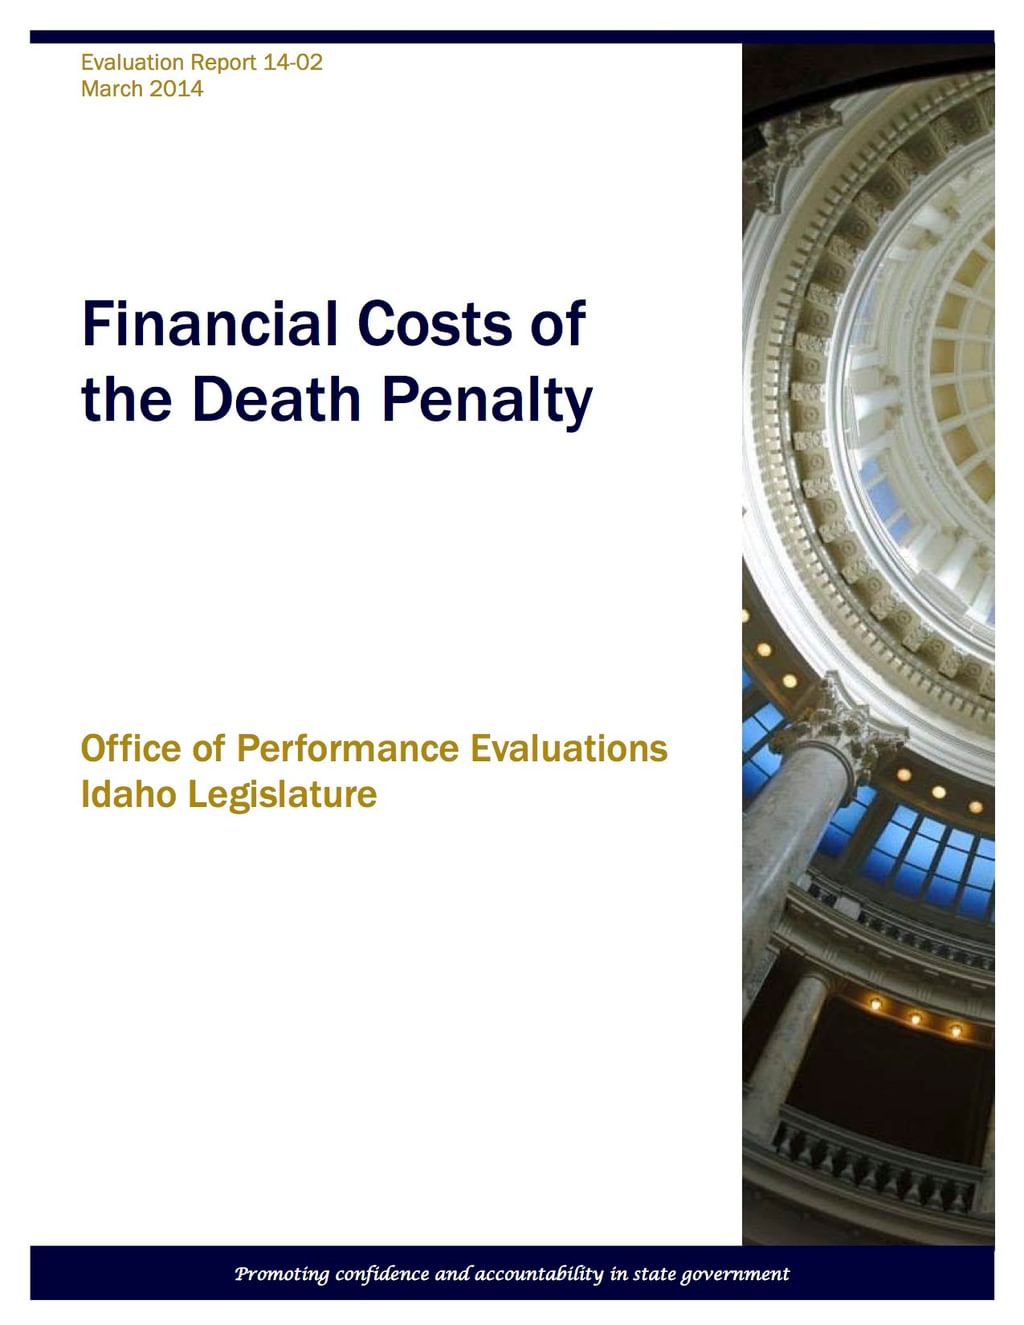 COSTS: Idaho Study Finds Death Penalty Cases Are Rare, Lengthy, & Costly